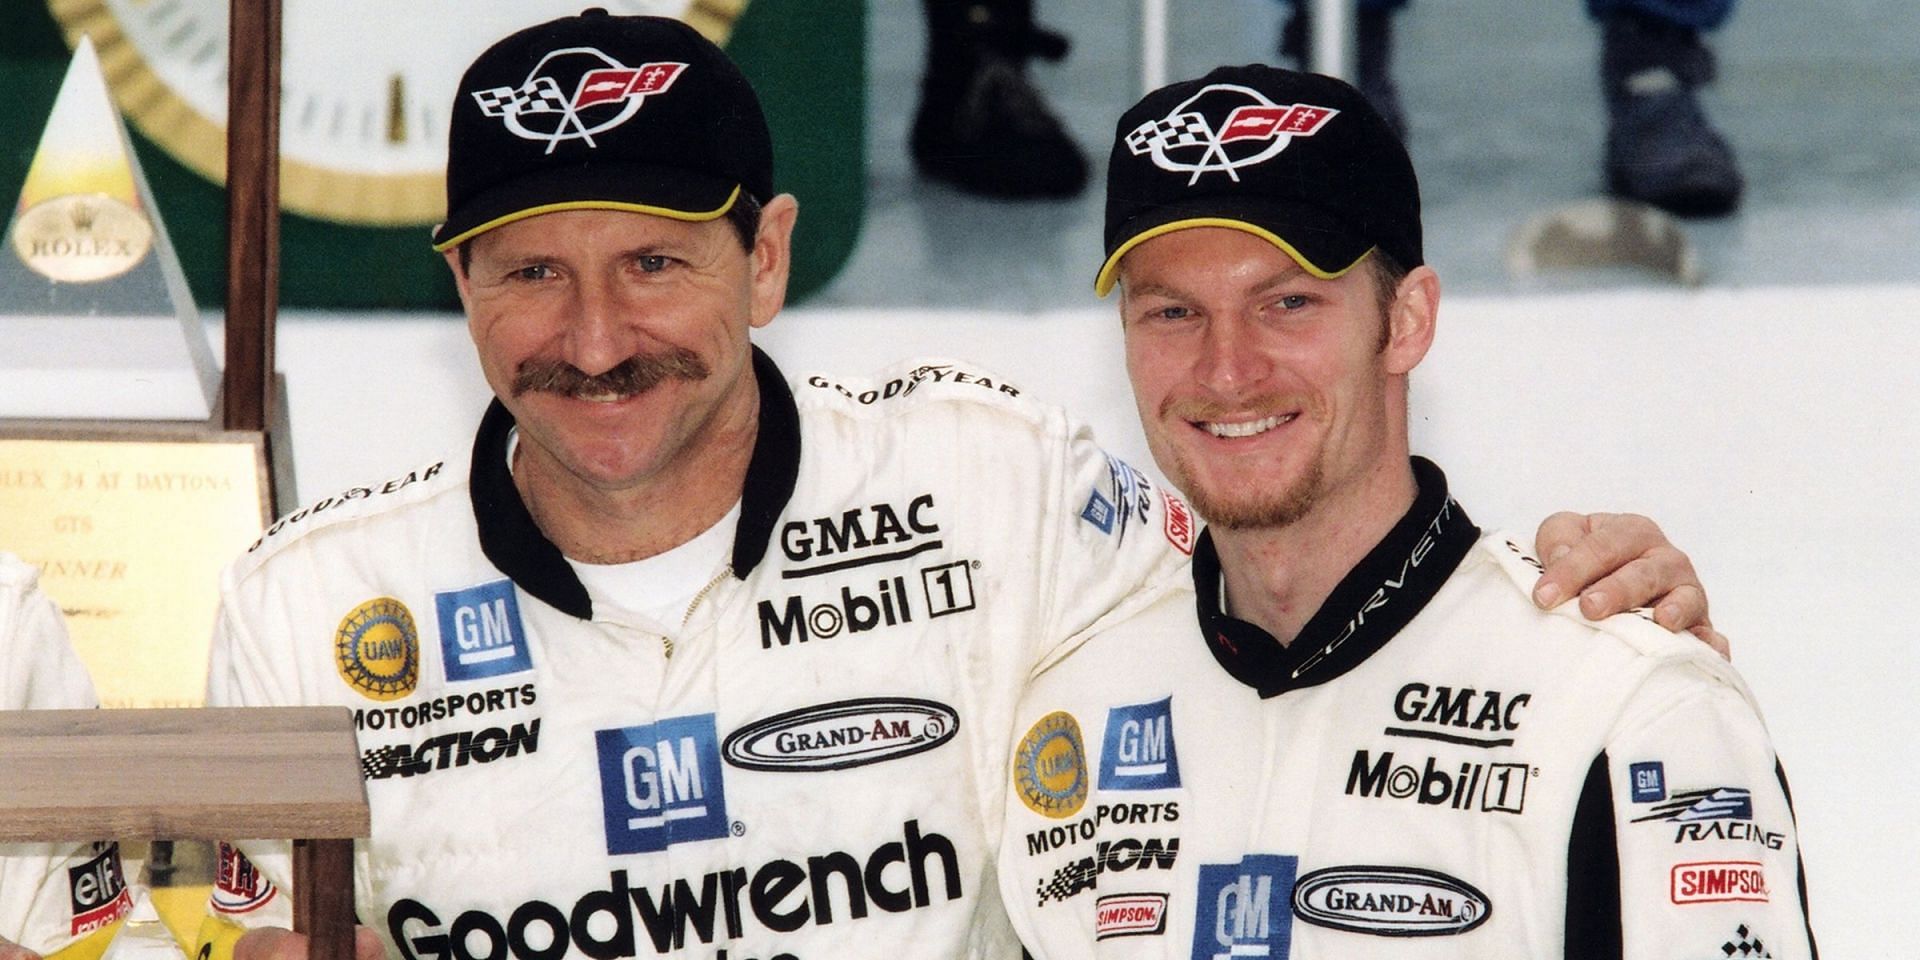 (L-R) NASCAR Cup Series drivers Dale Earnhardt Sr. and his son Dale Earnhardt Jr. Picture Credits: The Today Show/ISC Archives/CQ-Roll Call Group via Getty Images